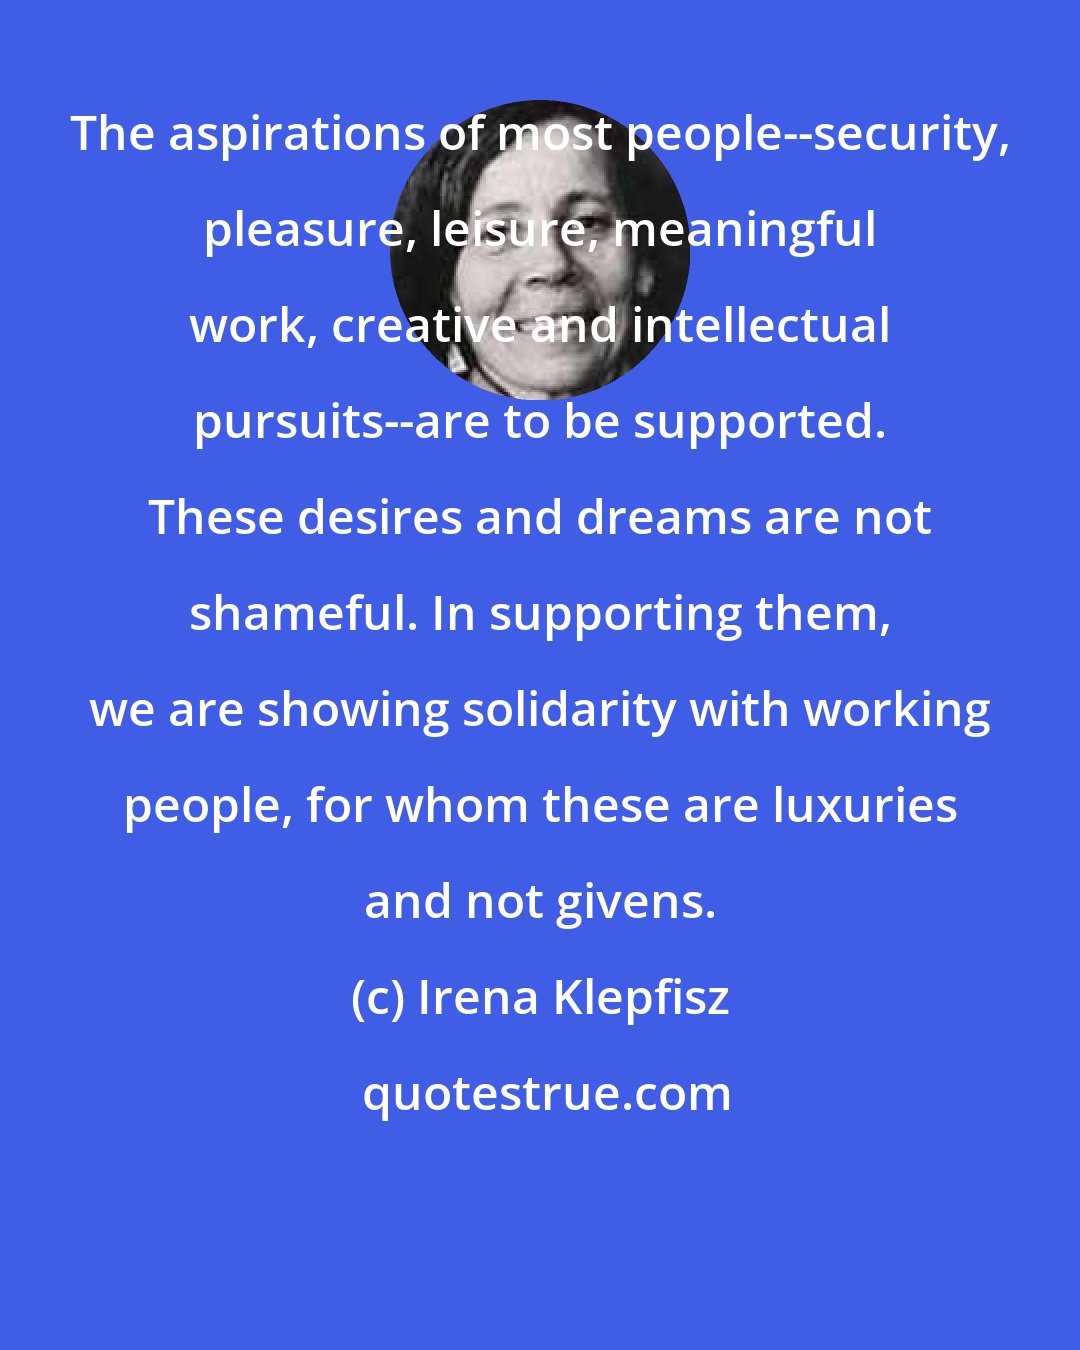 Irena Klepfisz: The aspirations of most people--security, pleasure, leisure, meaningful work, creative and intellectual pursuits--are to be supported. These desires and dreams are not shameful. In supporting them, we are showing solidarity with working people, for whom these are luxuries and not givens.